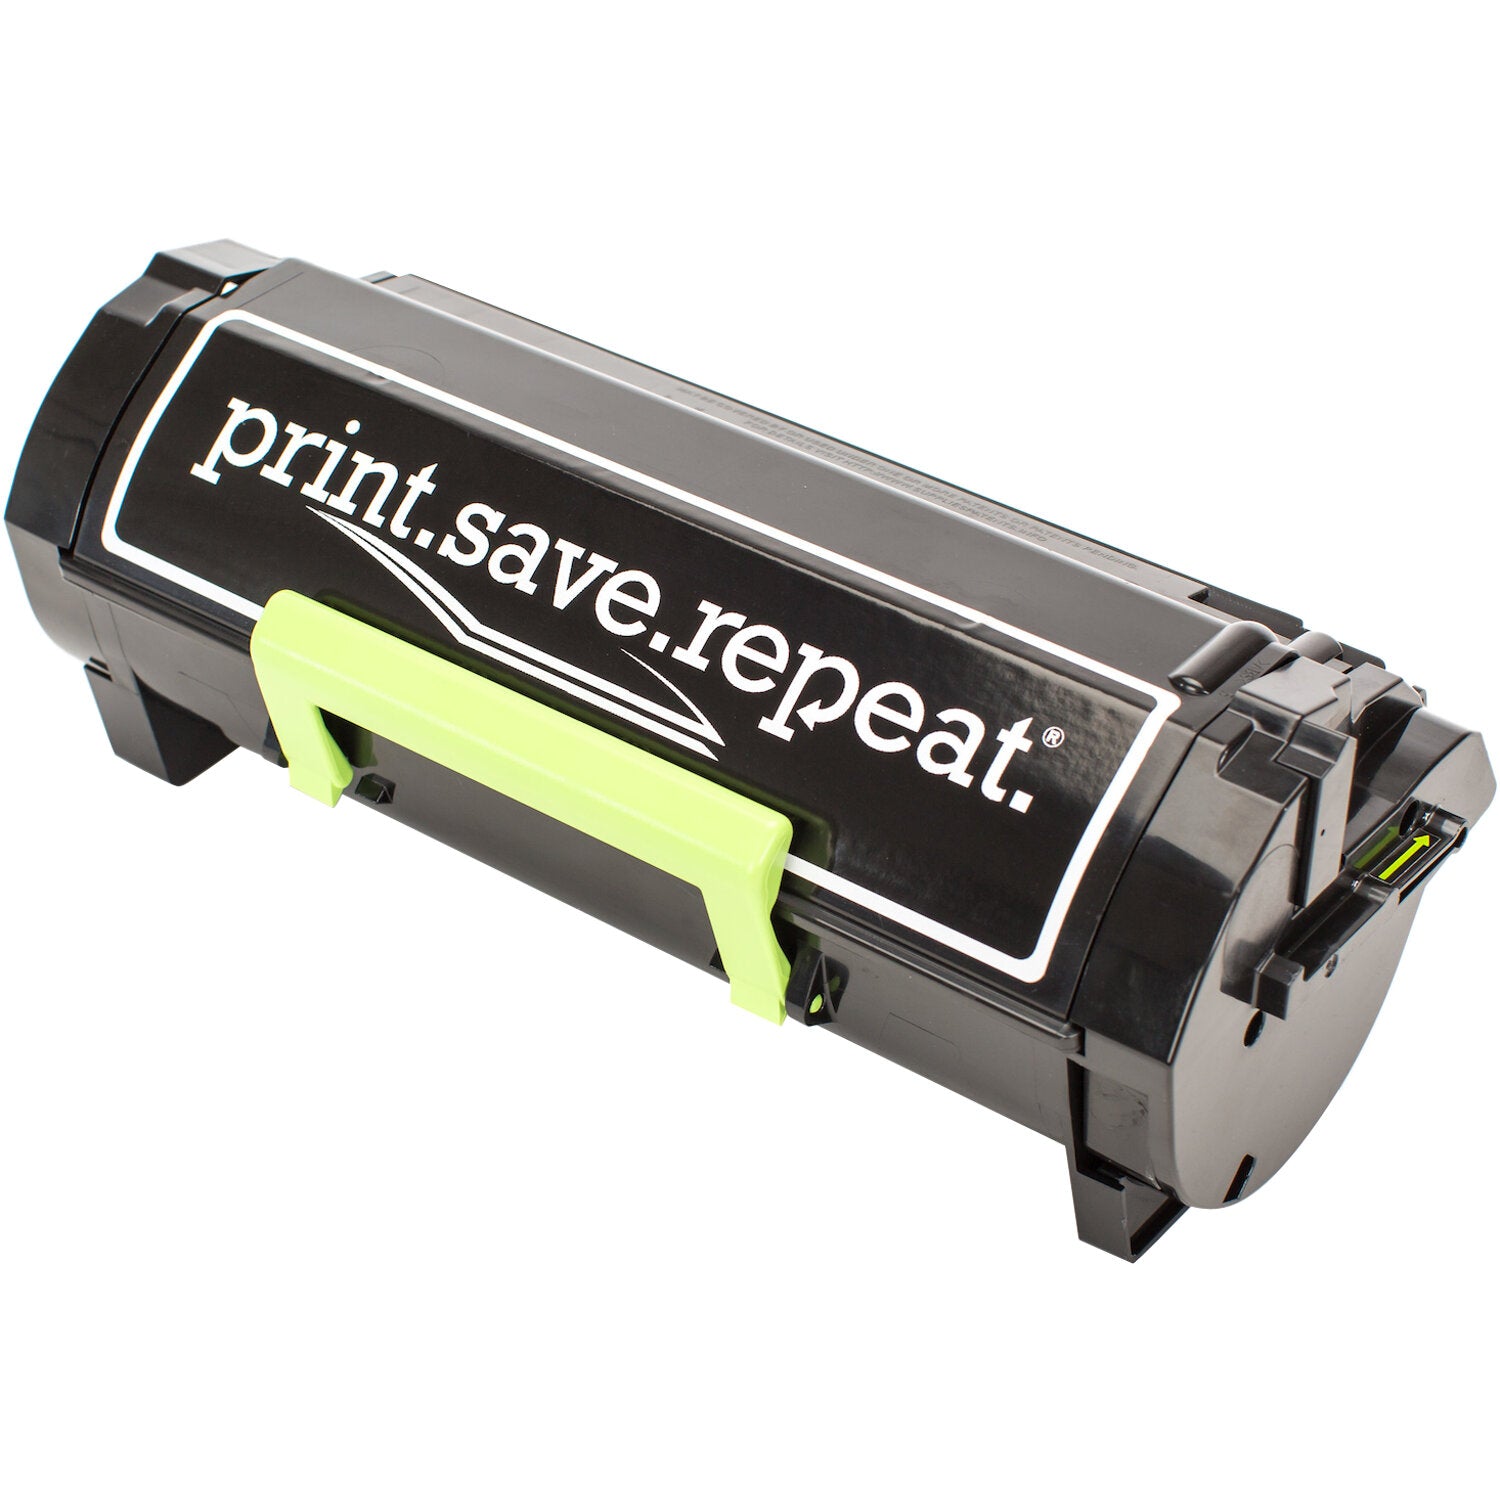 Print.Save.Repeat. Lexmark 501U Ultra High Yield Remanufactured Toner Cartridge (50F1U00) for MS510, MS610 [20,000 Pages]